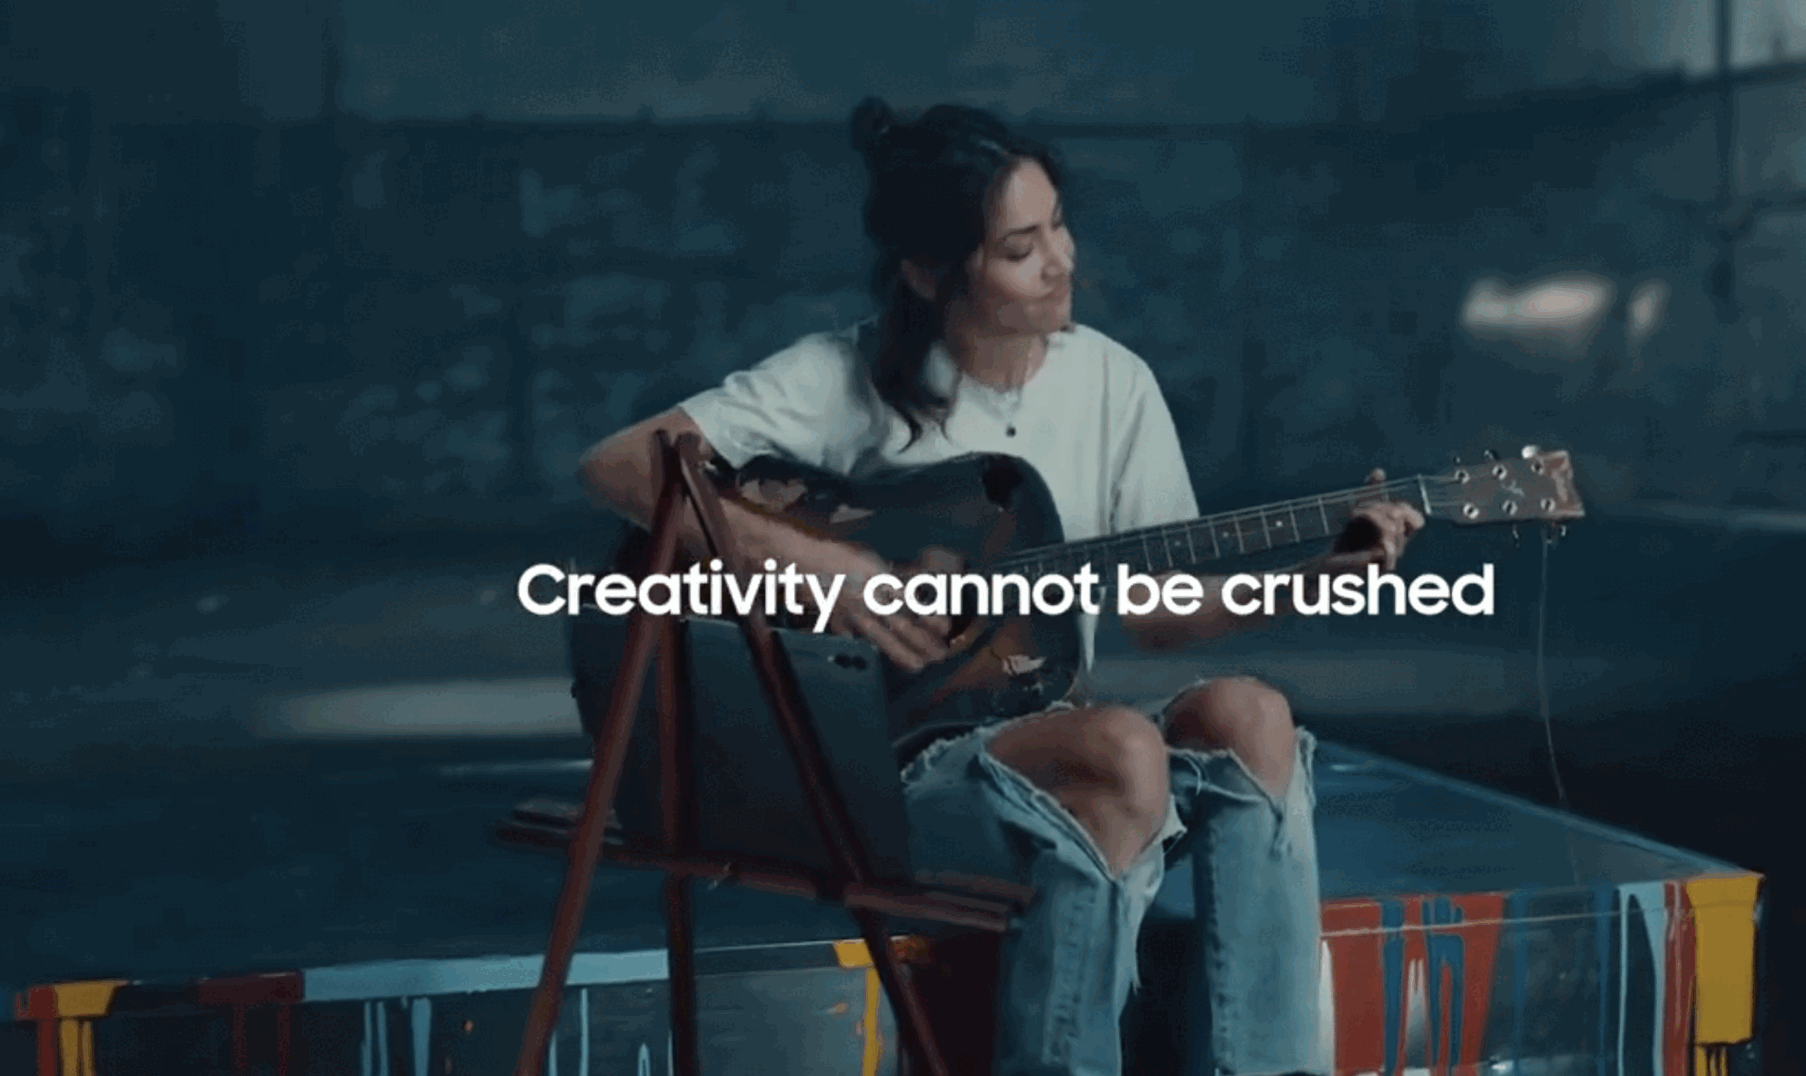 Samsung mocks Apple’s iPad ad by launching ‘Creativity cannot be crushed’ campaign